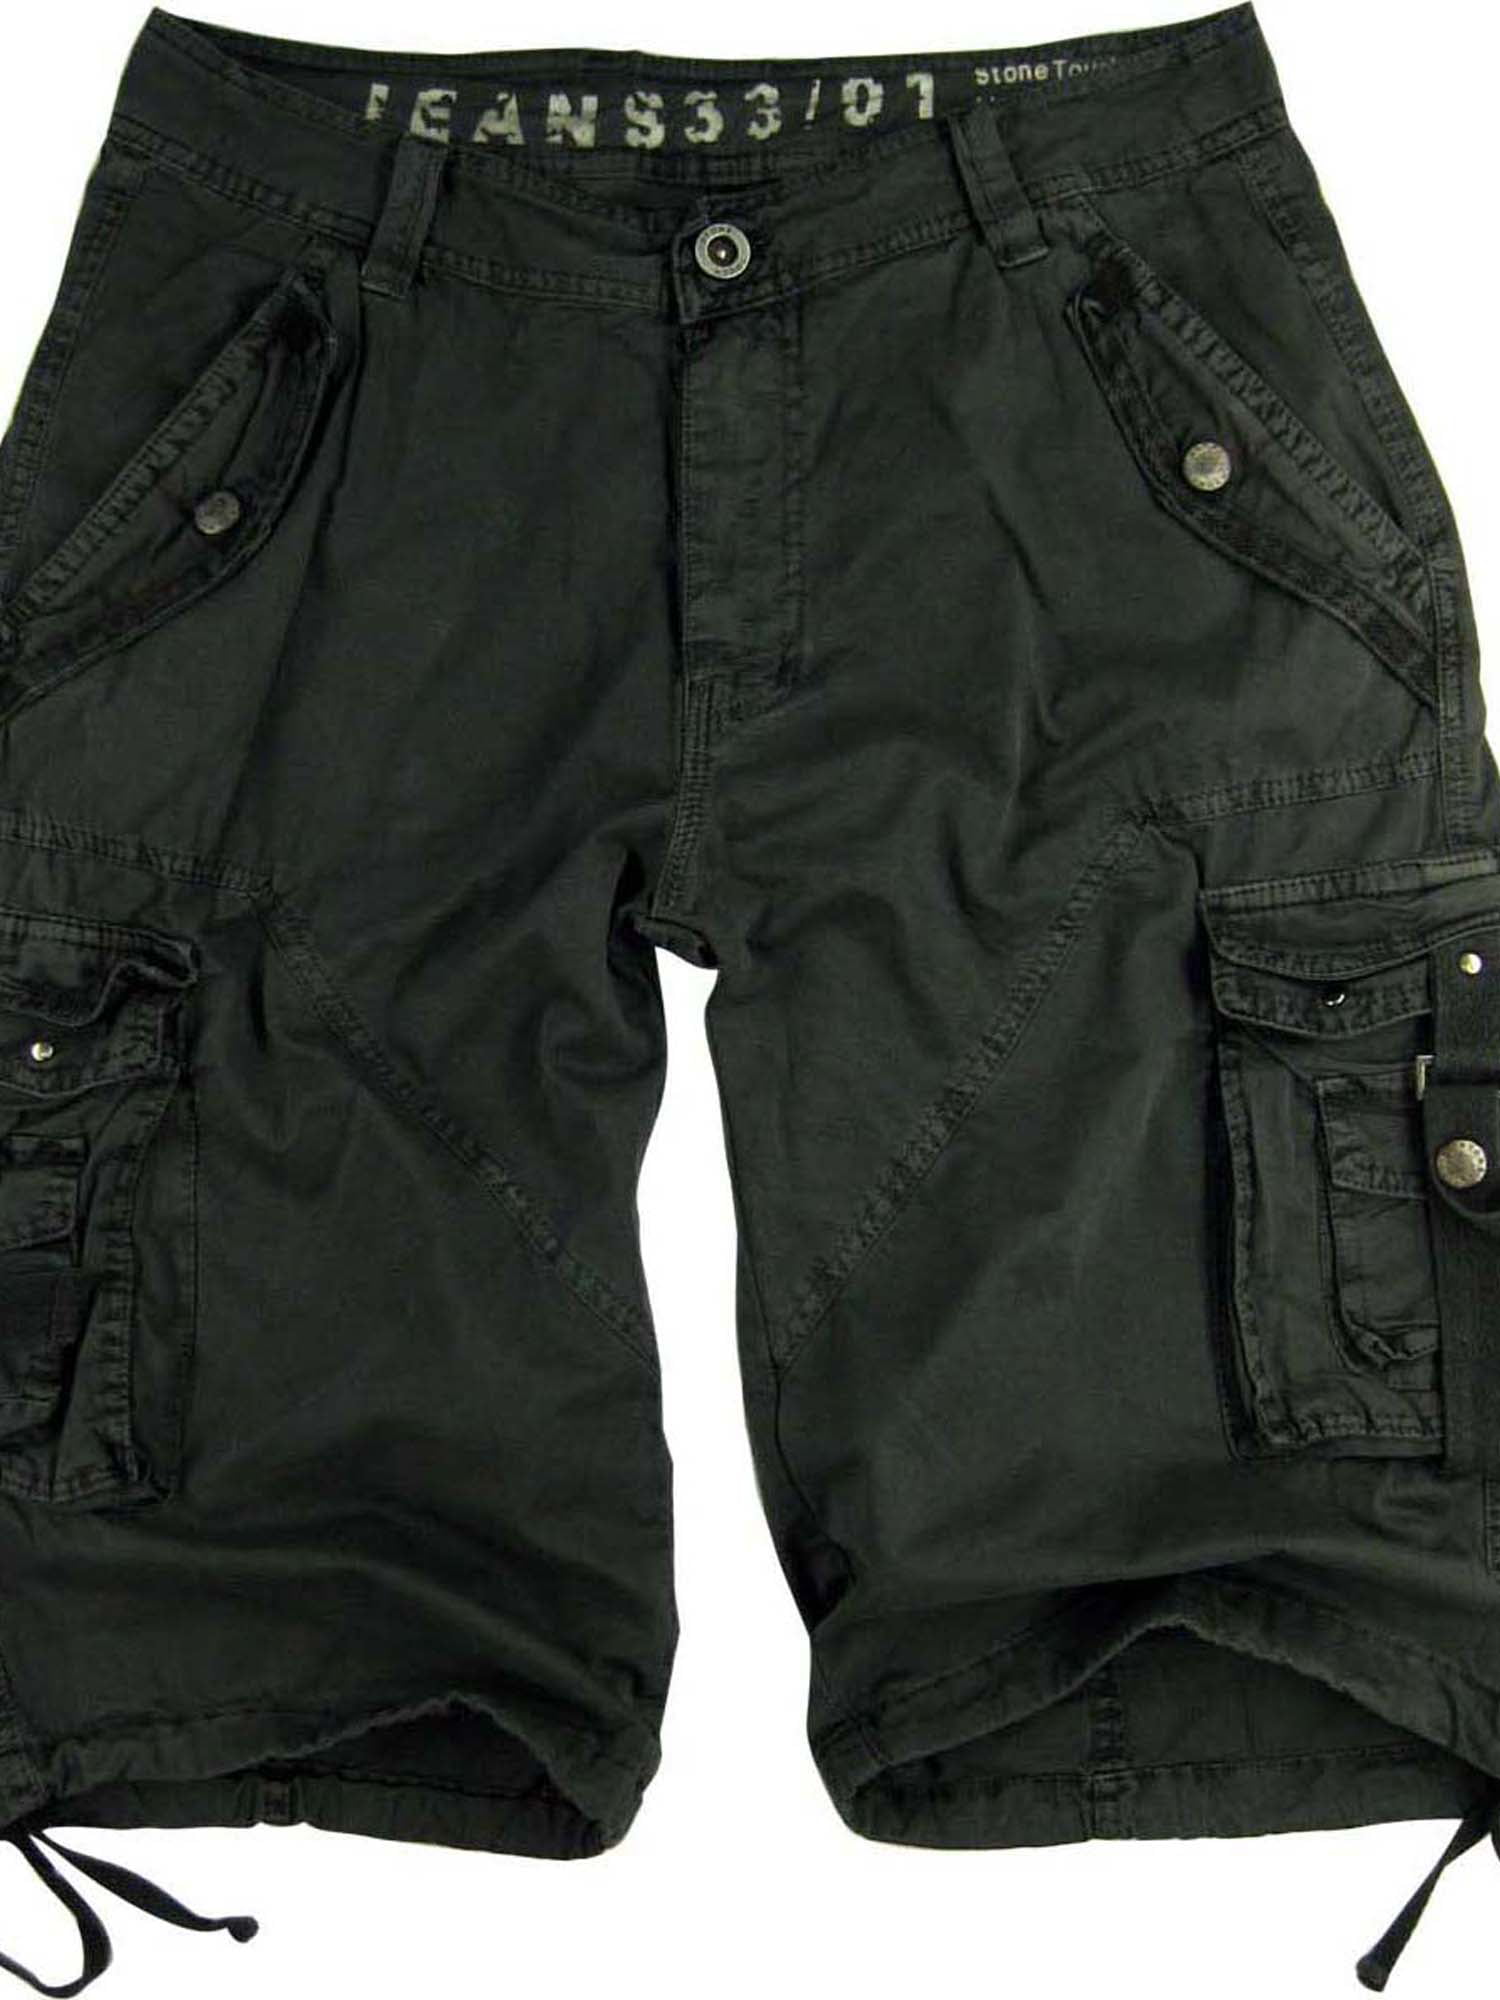 Stone Touch Jeans - Mens Military Style Dark Grey Cargo Shorts #A8s ...